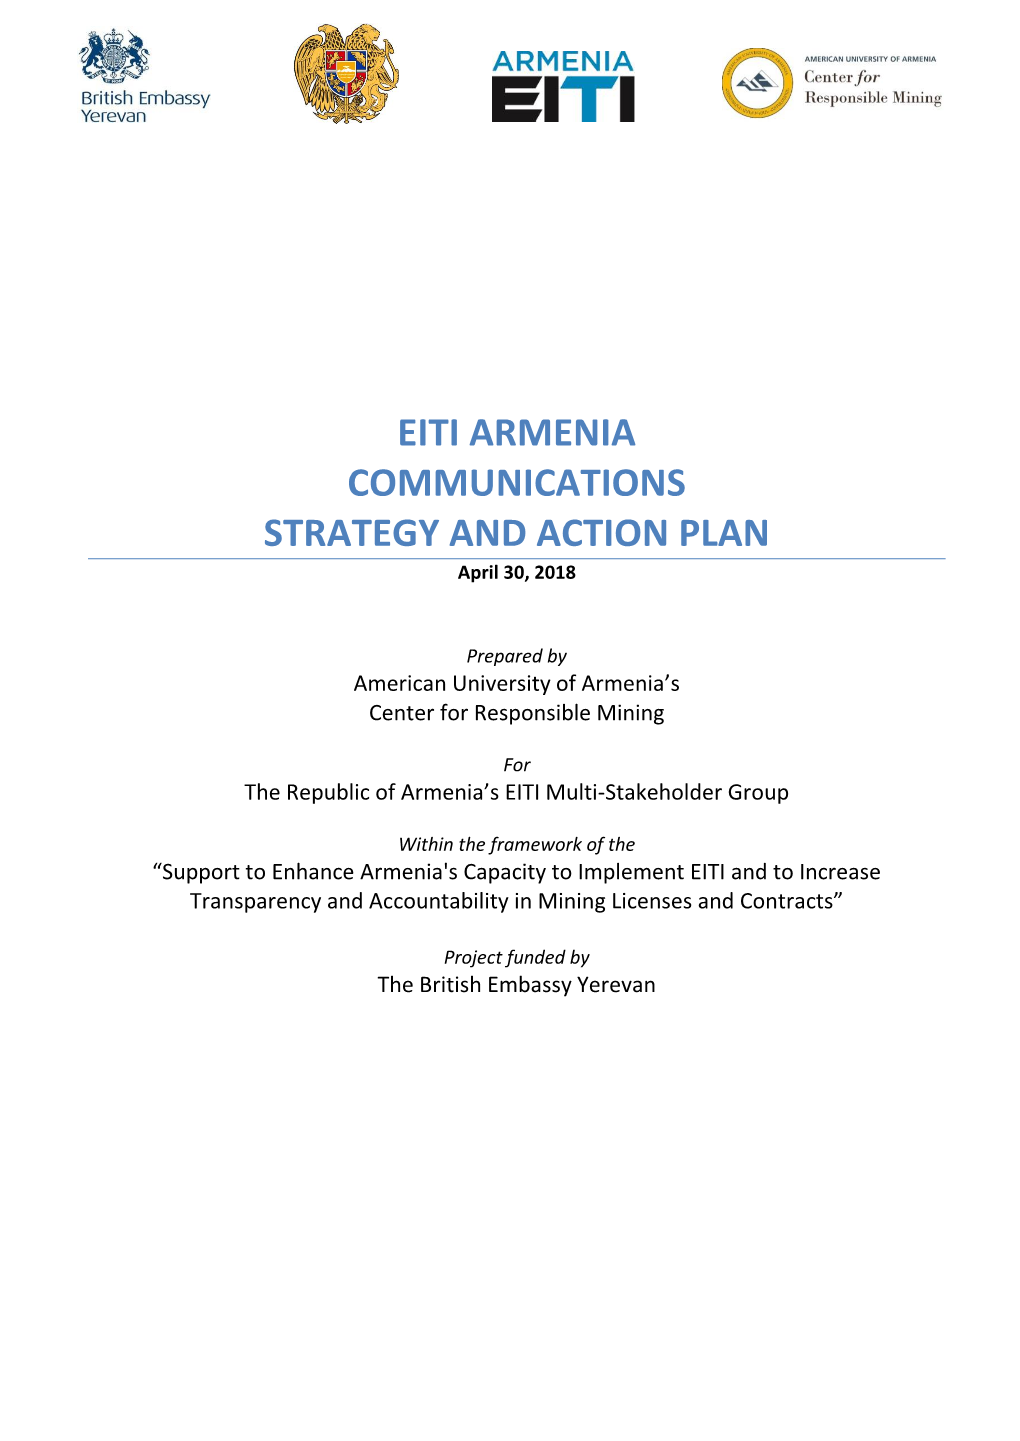 EITI ARMENIA COMMUNICATIONS STRATEGY and ACTION PLAN April 30, 2018